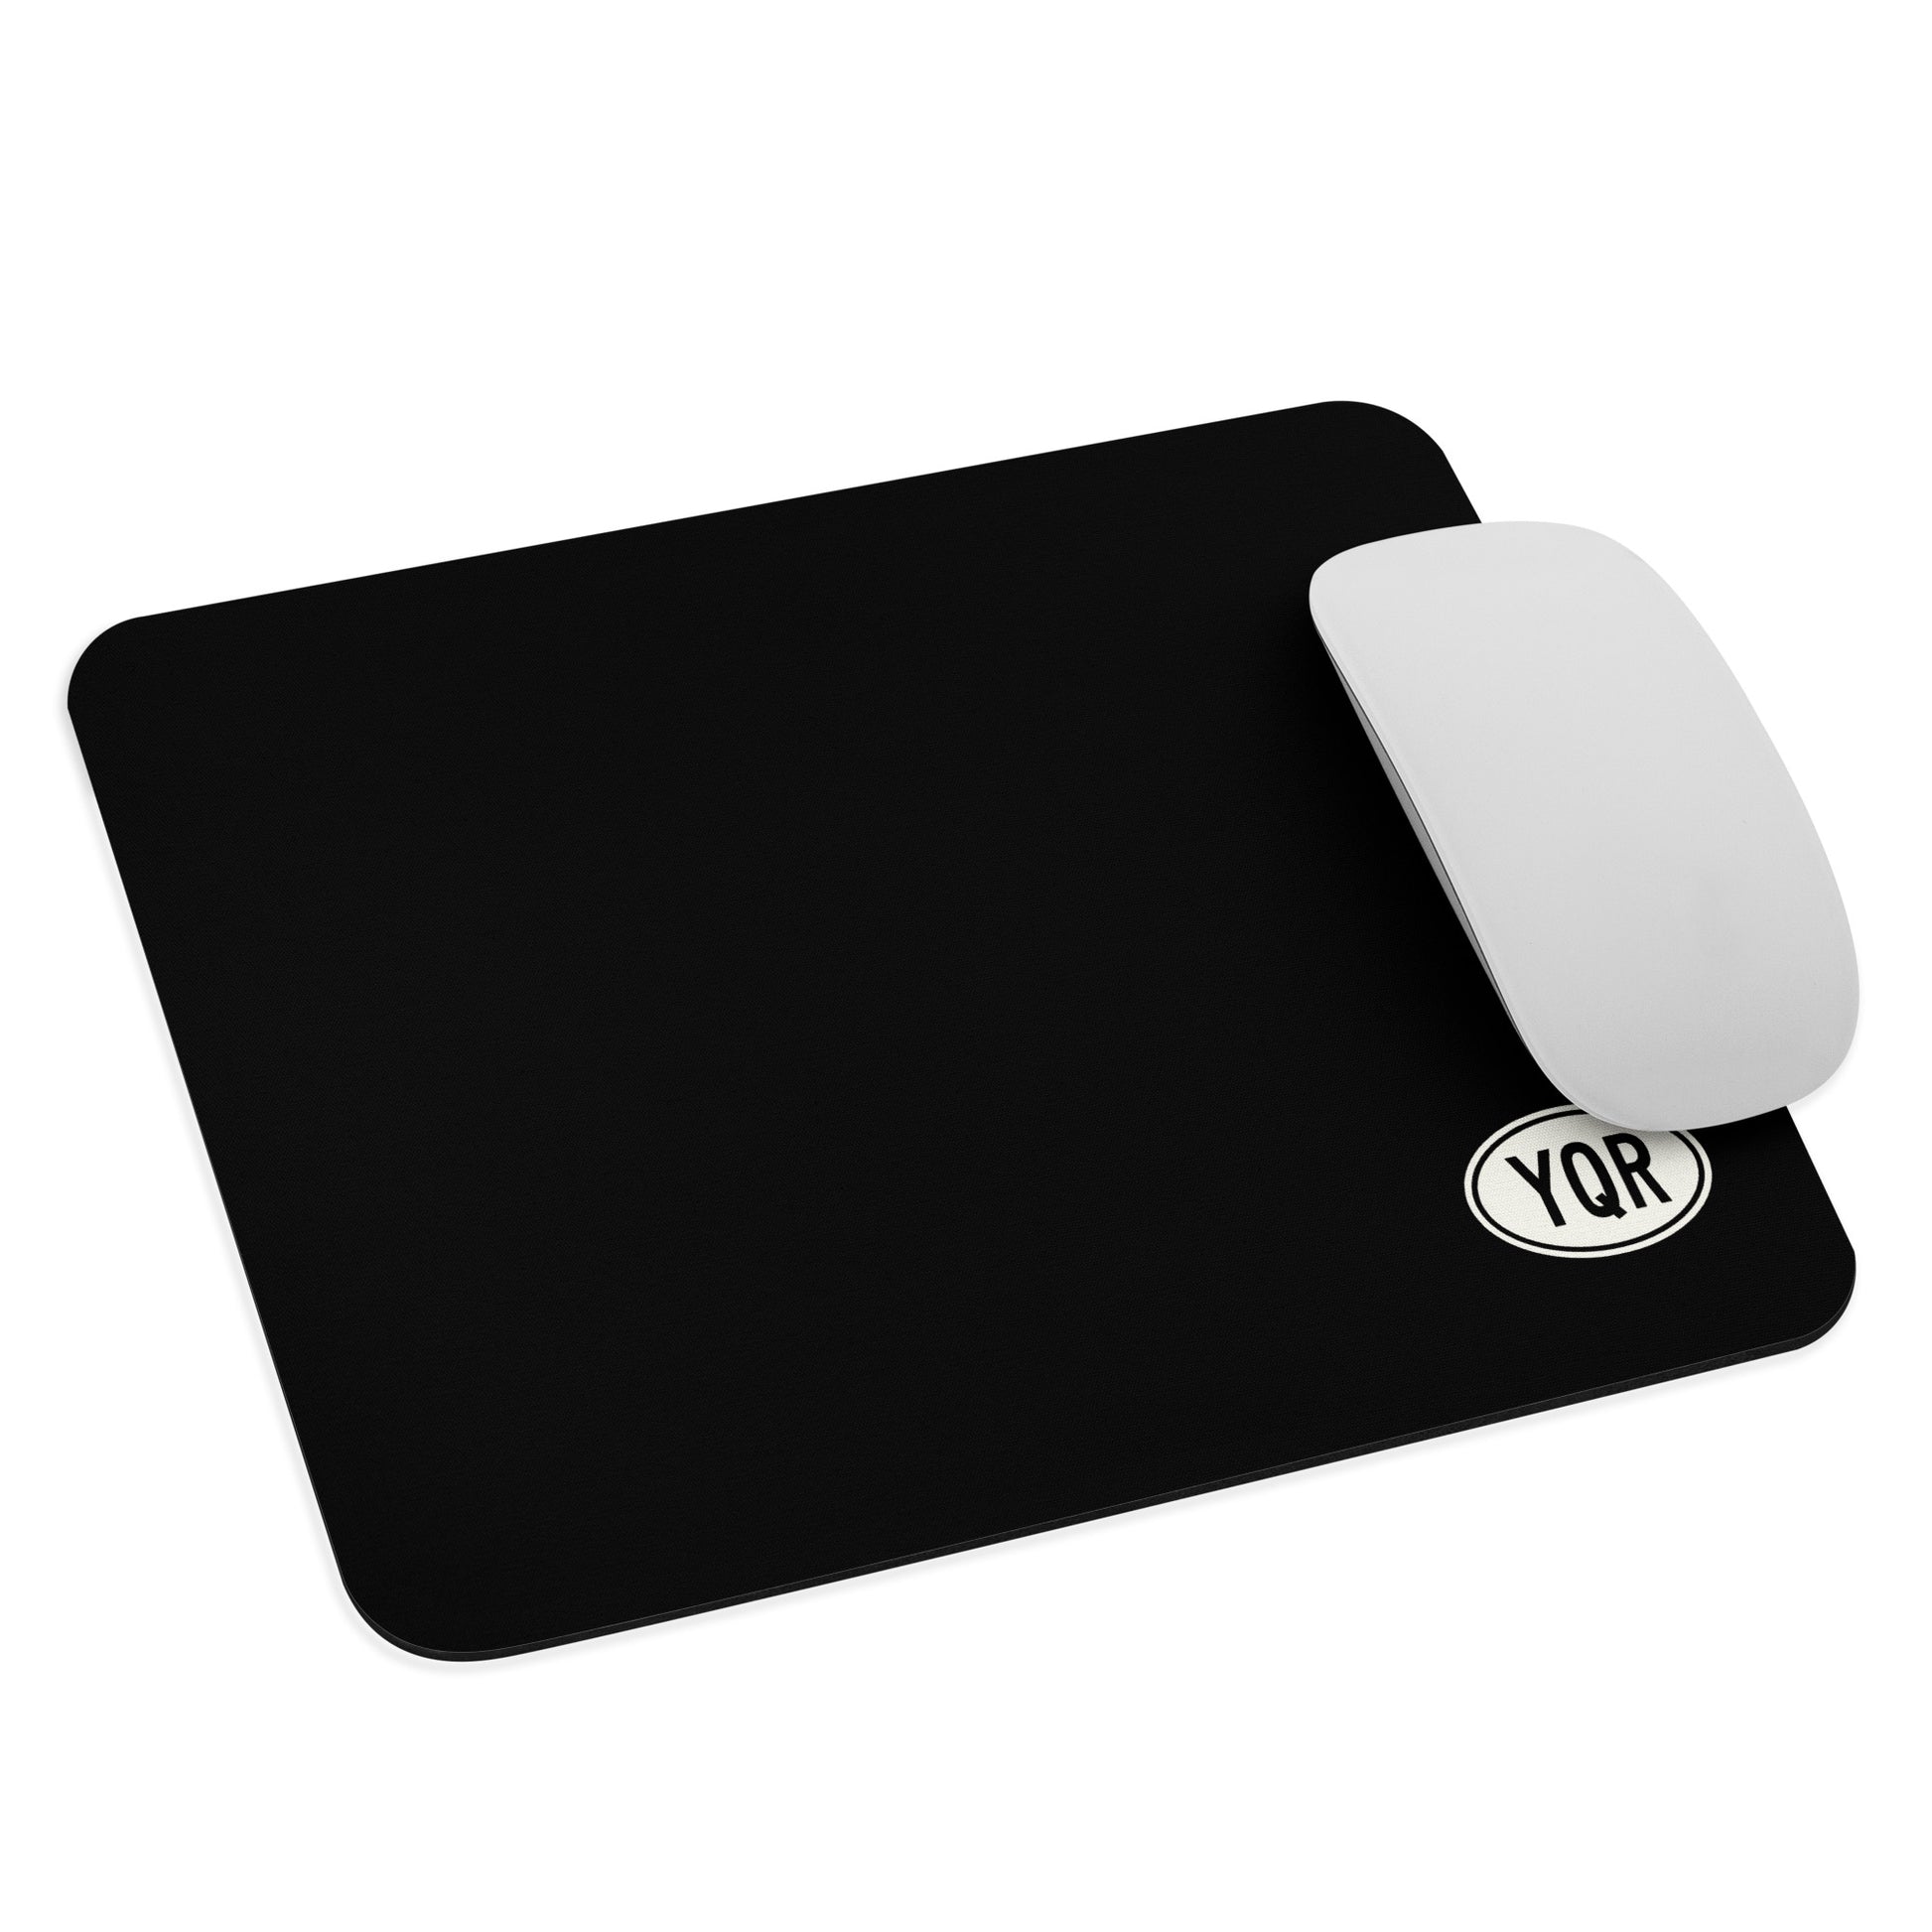 Unique Travel Gift Mouse Pad - White Oval • YQR Regina • YHM Designs - Image 03